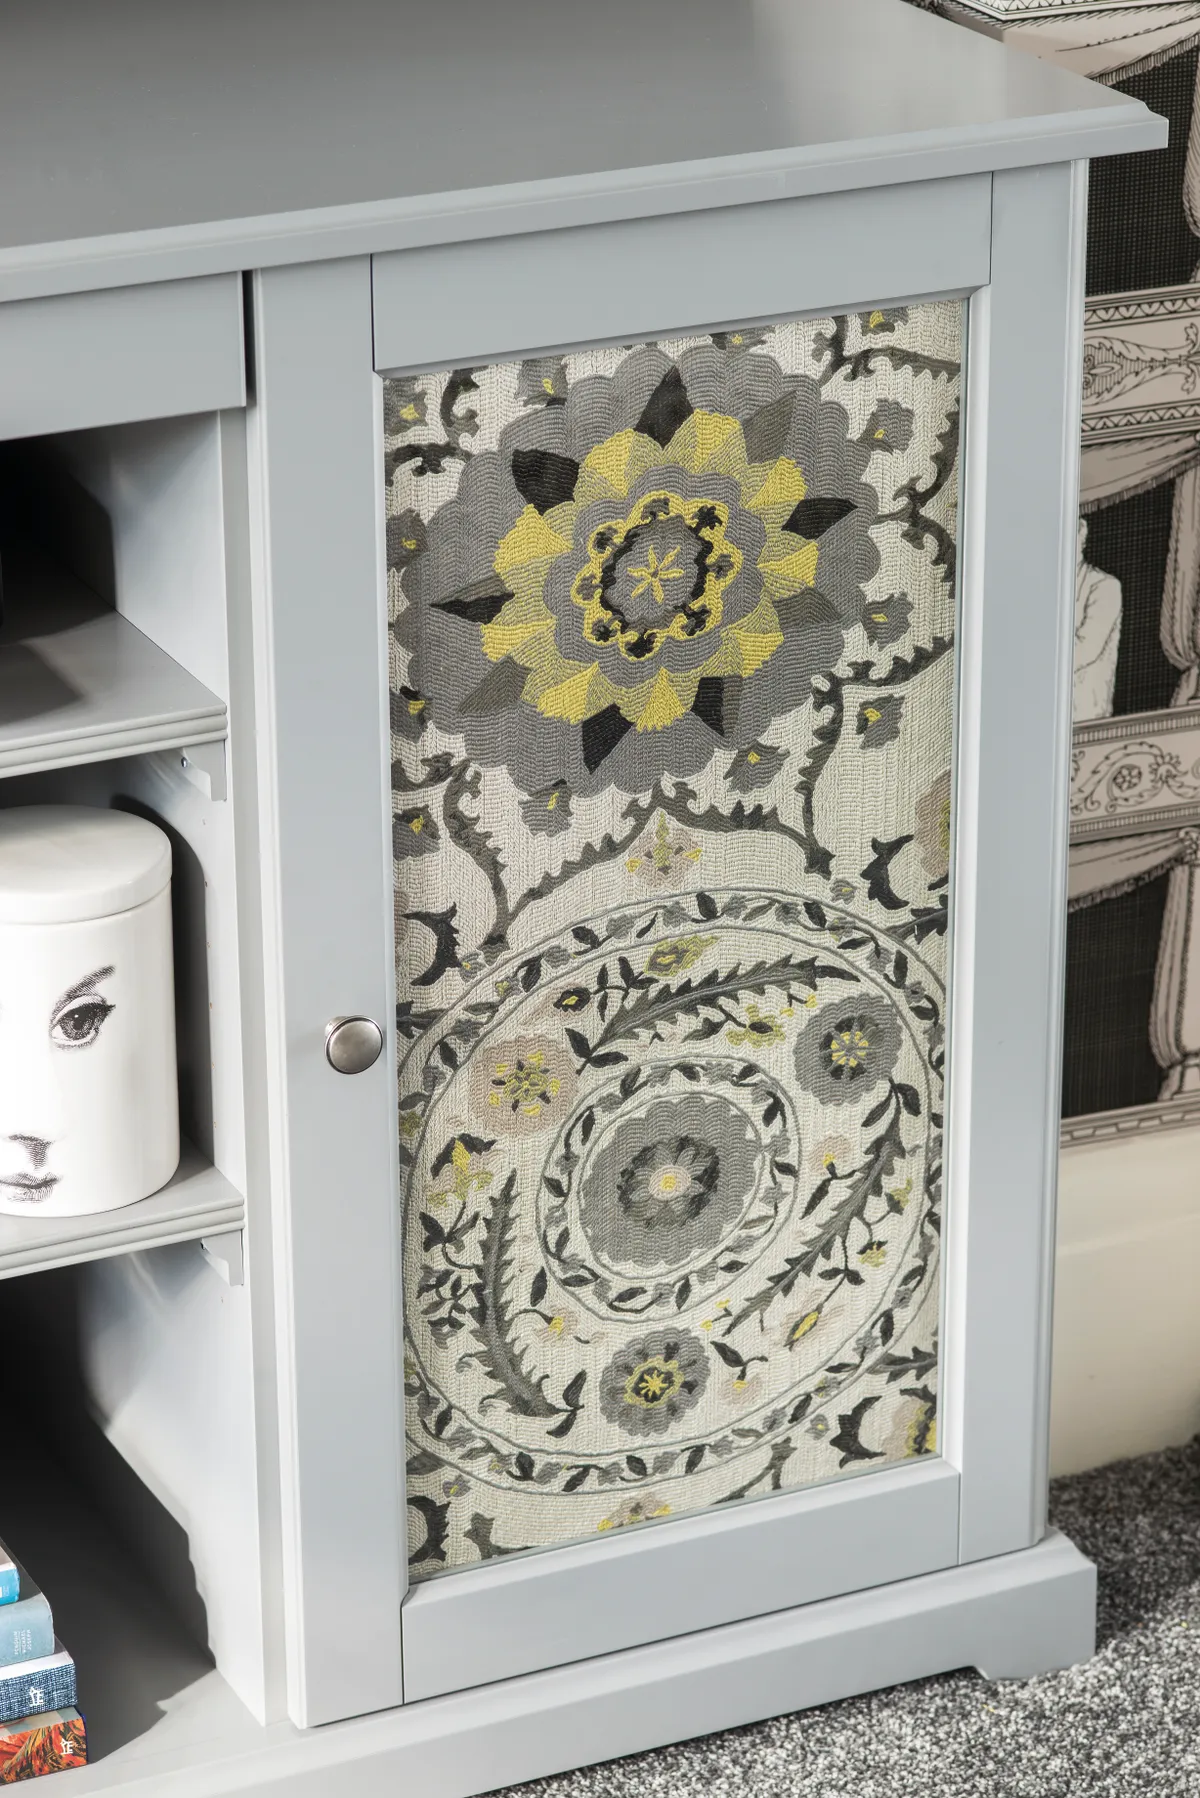 Good idea! A sideboard provides plenty of storage and keeps anything messy out of sight. Debra has covered the two glass panels at the ends with leftover fabric to tie it in with the overall scheme